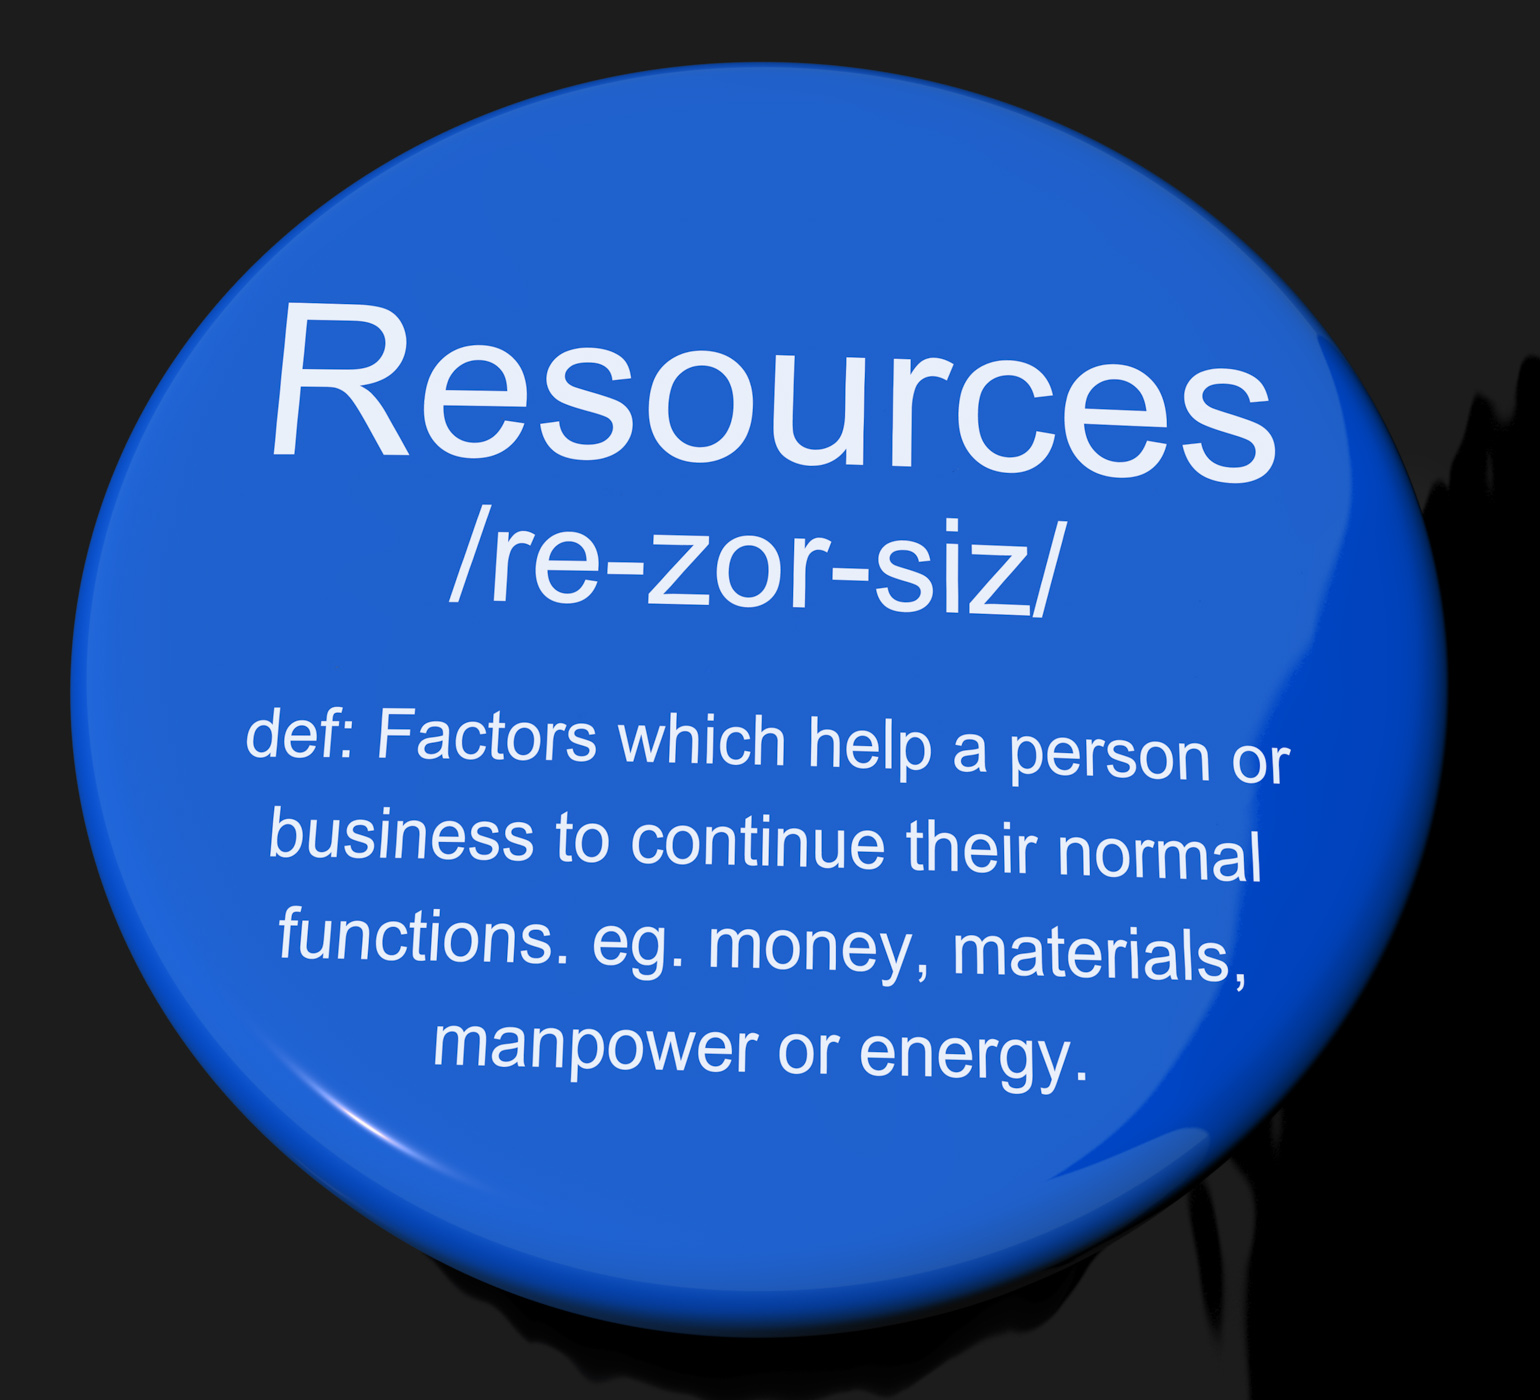 Resources definition button showing materials assets and manpower for photo